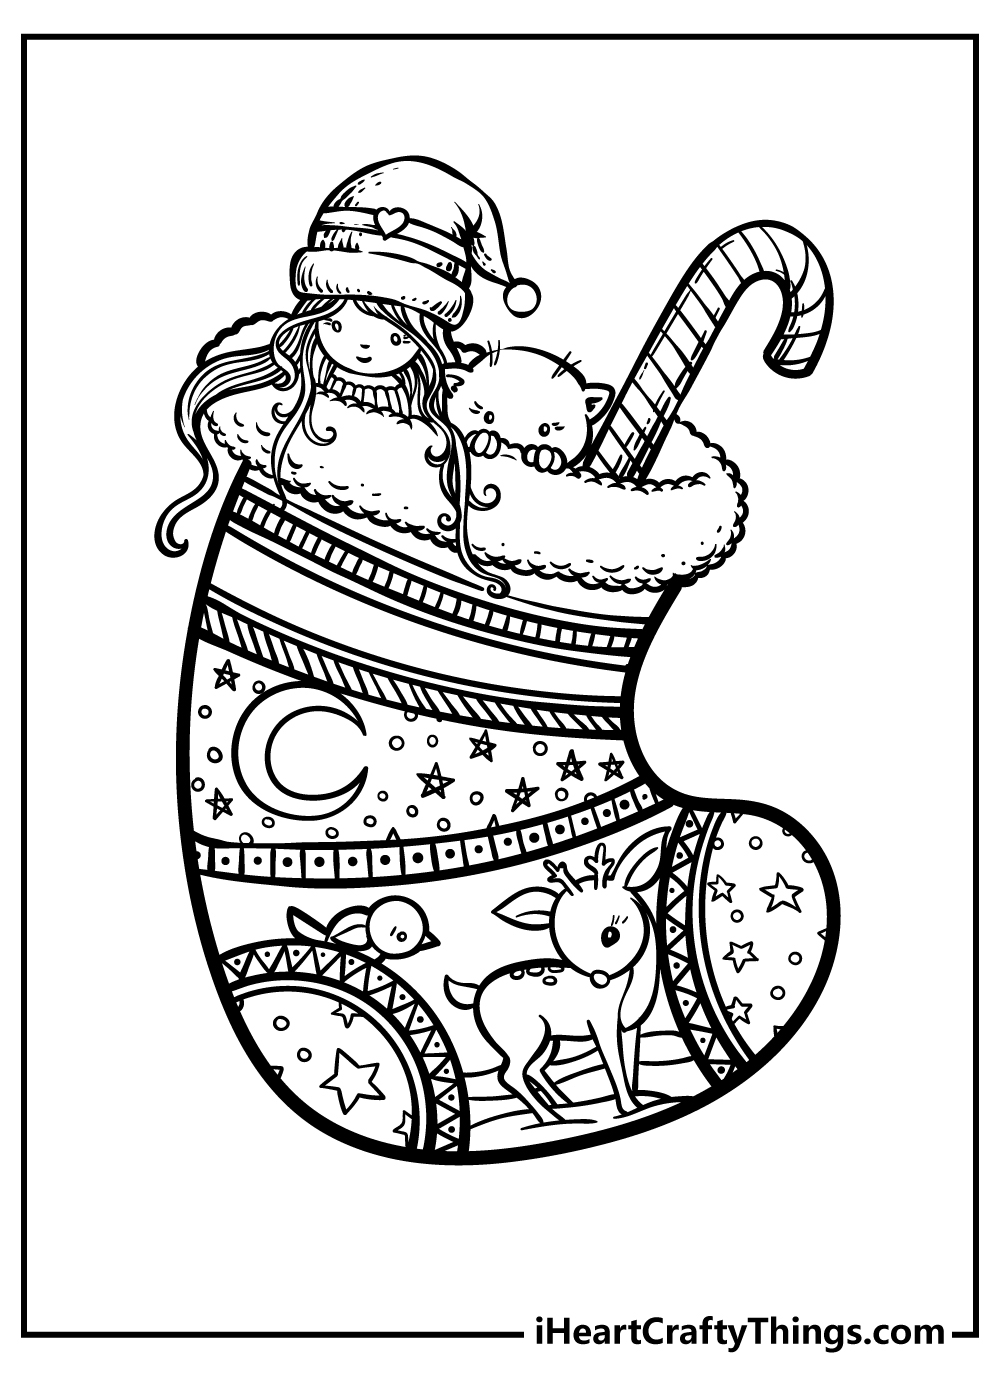 Christmas Coloring Pages for adults free printable